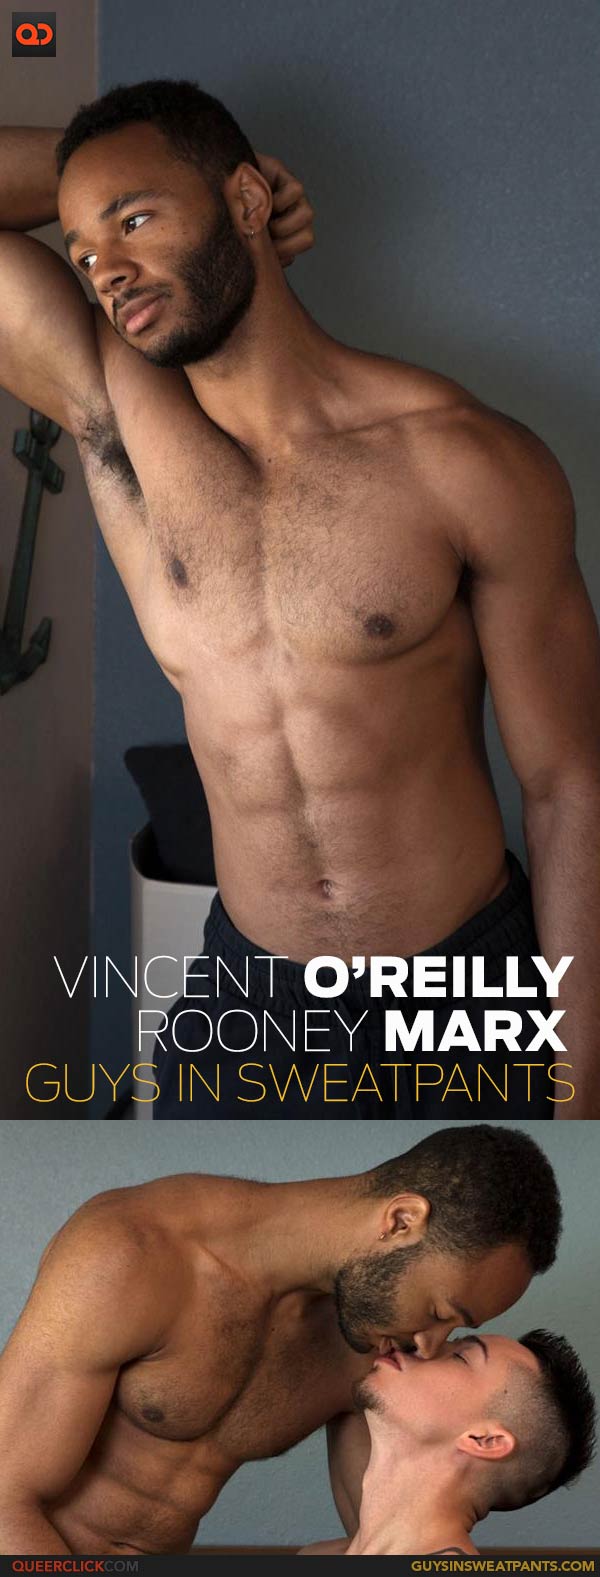 Guys in Sweatpants: Rooney Marx and Vincent O’Reilly - Use my Hole!